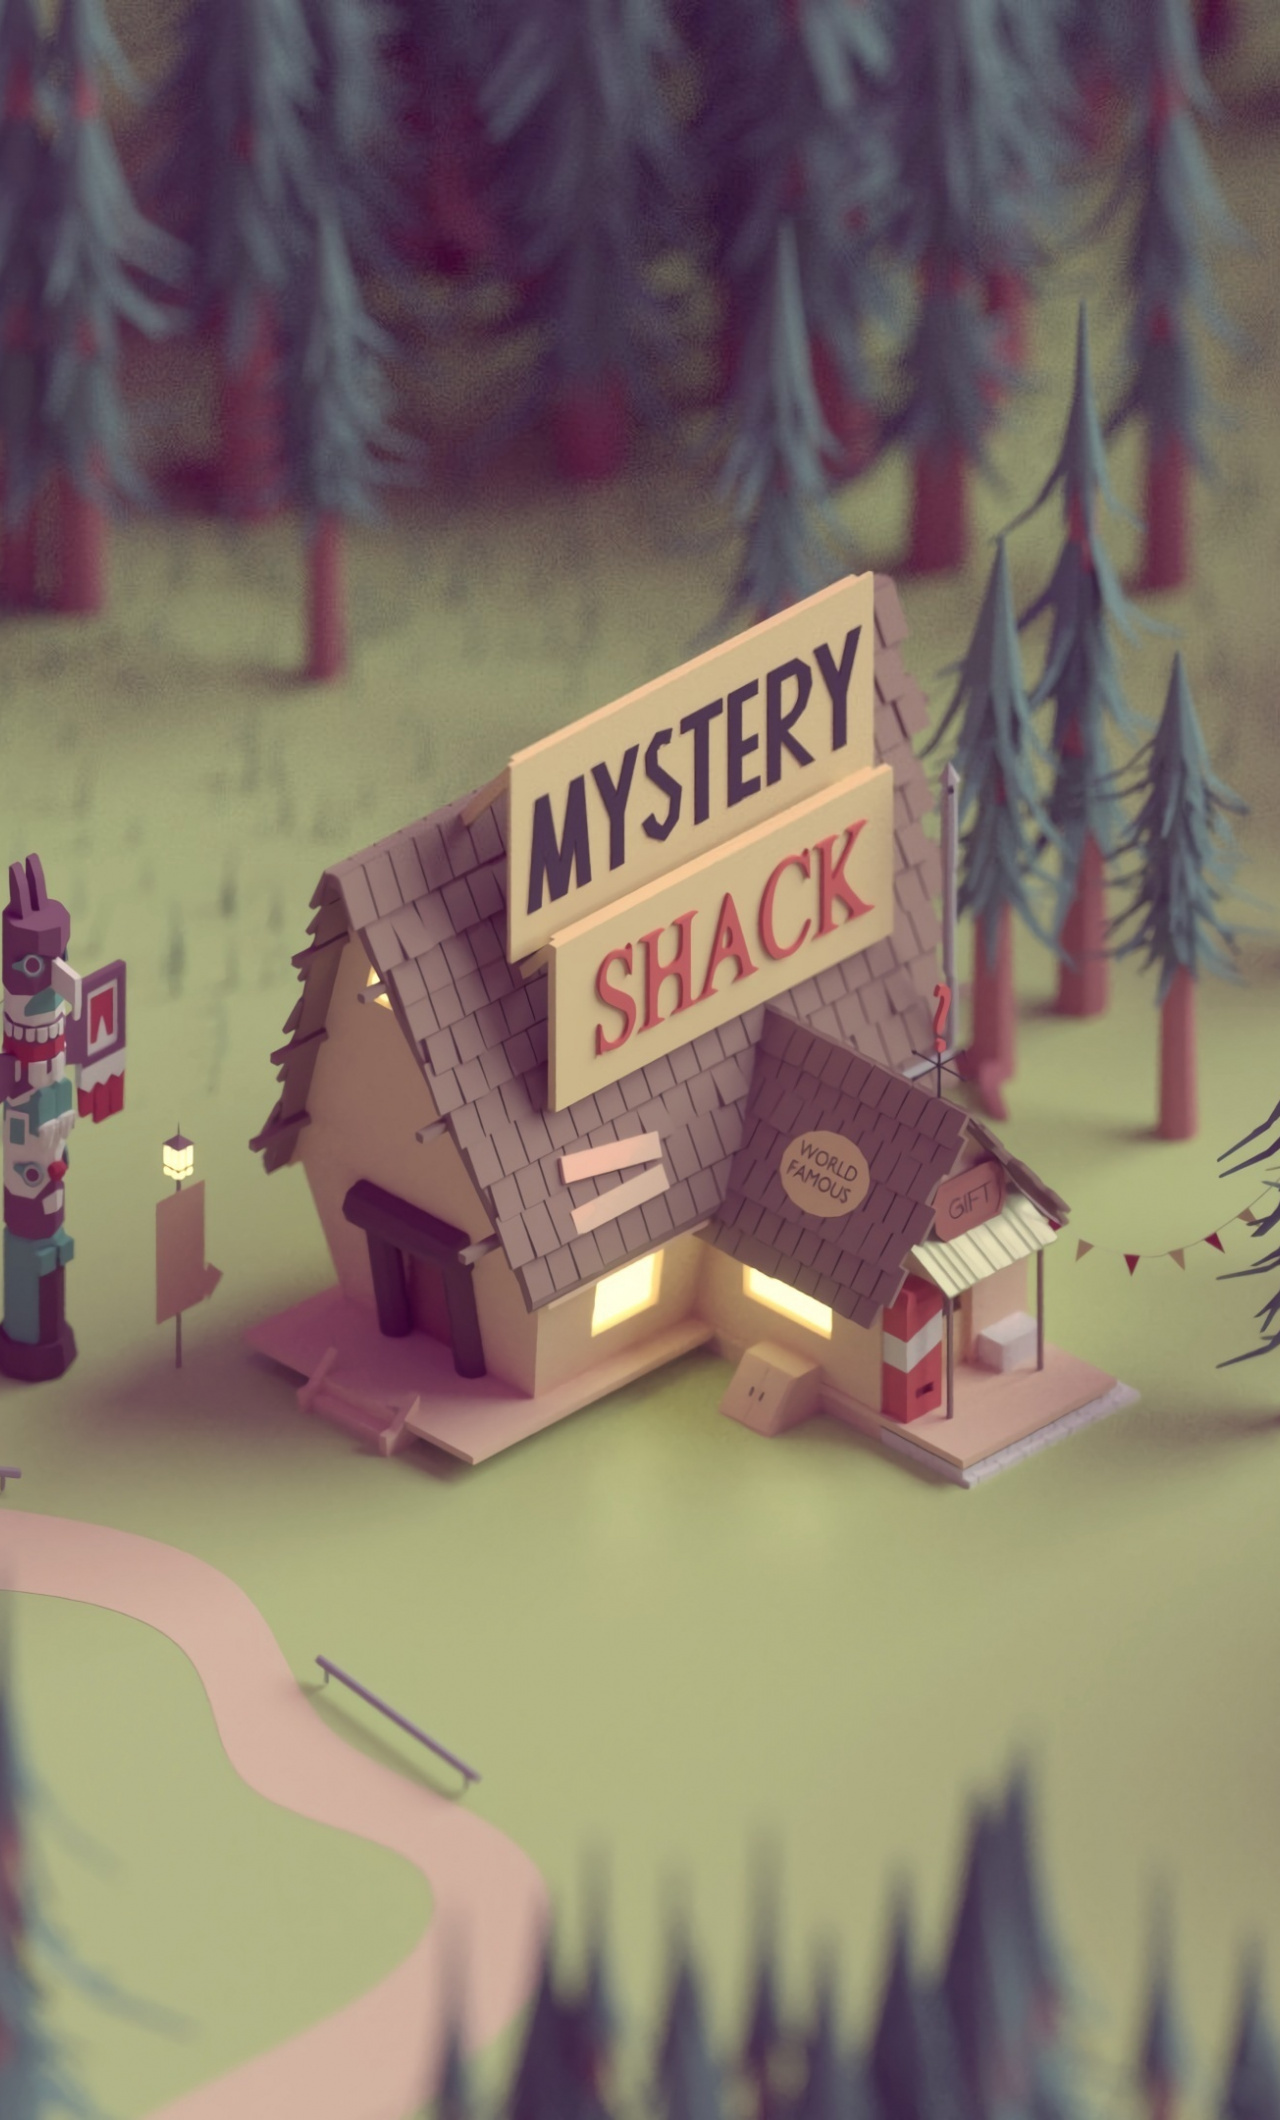 House, Forest, Tv Show, Gravity Falls, Wallpaper - Low Poly Gravity Falls - HD Wallpaper 